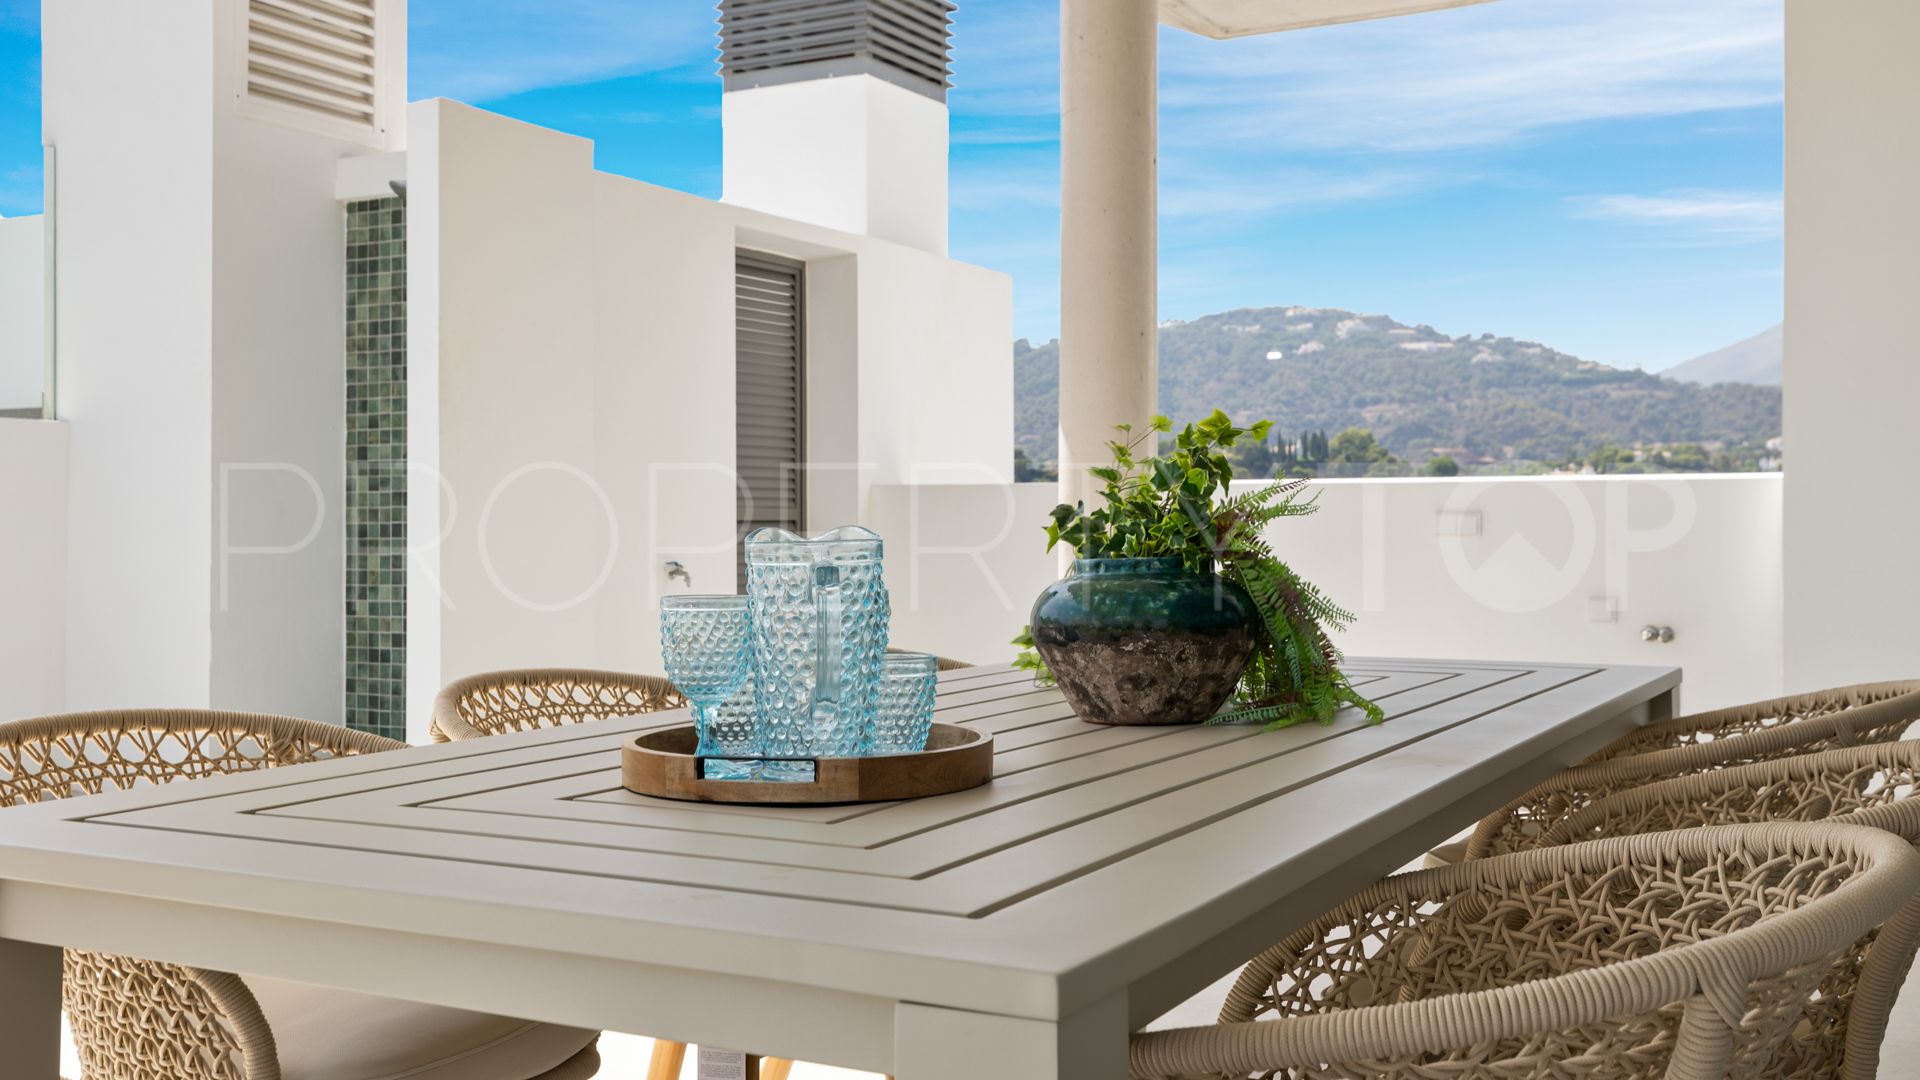 For sale La Quinta penthouse with 4 bedrooms